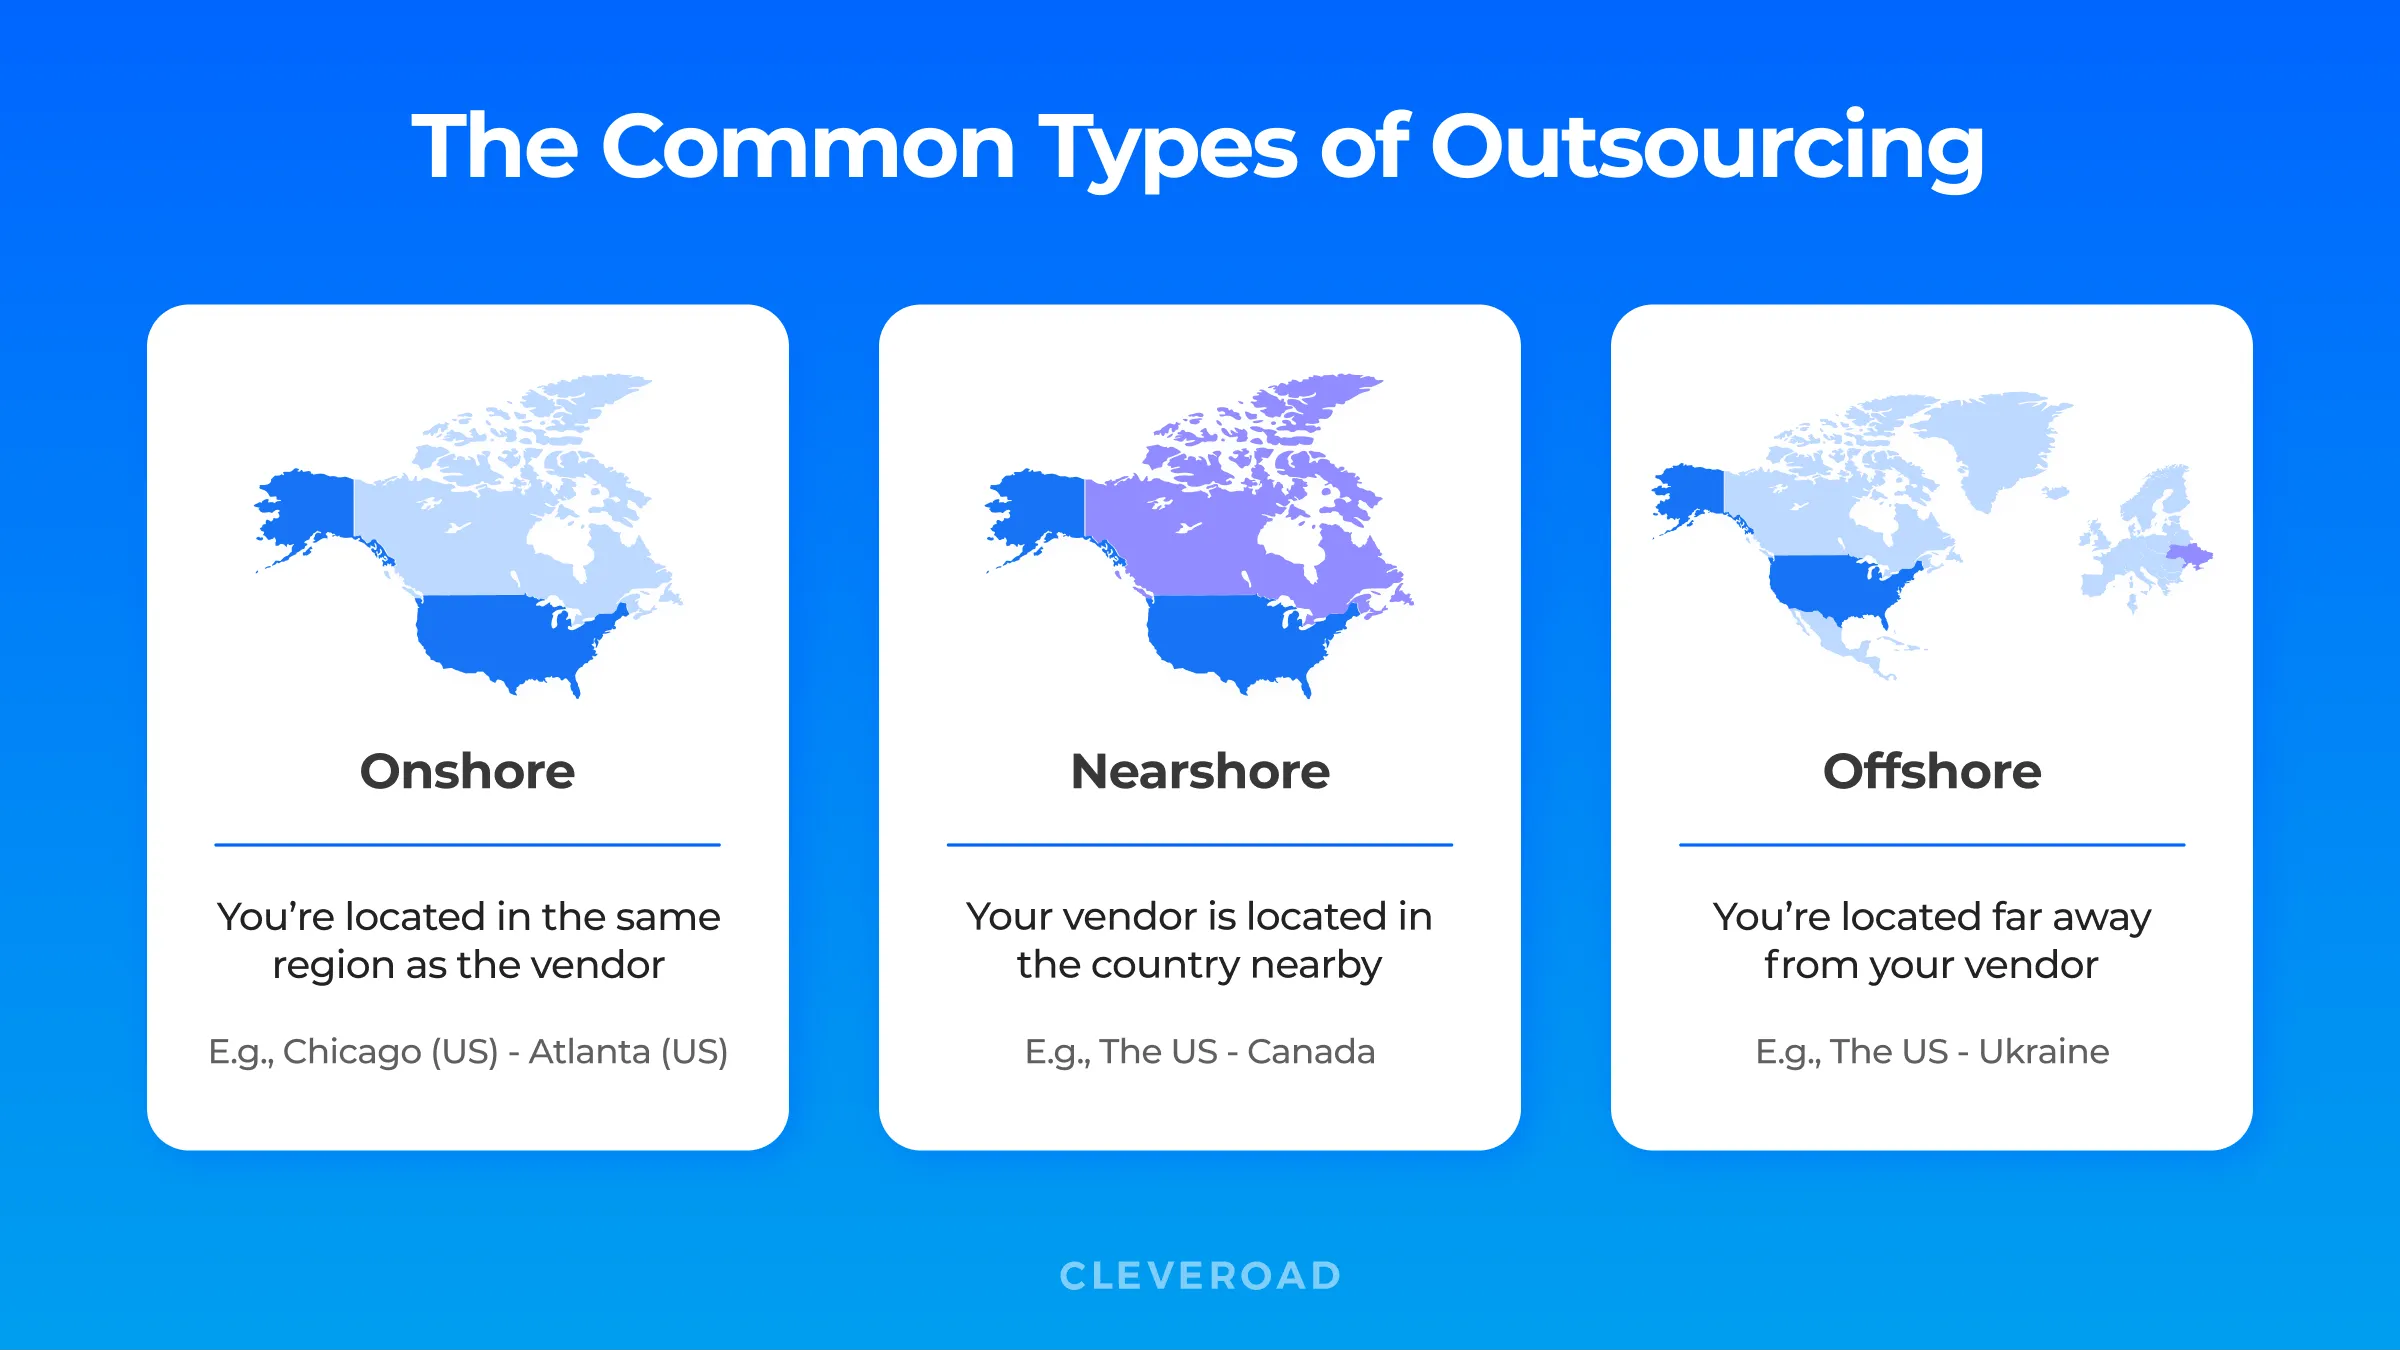 The common types of outsourcing